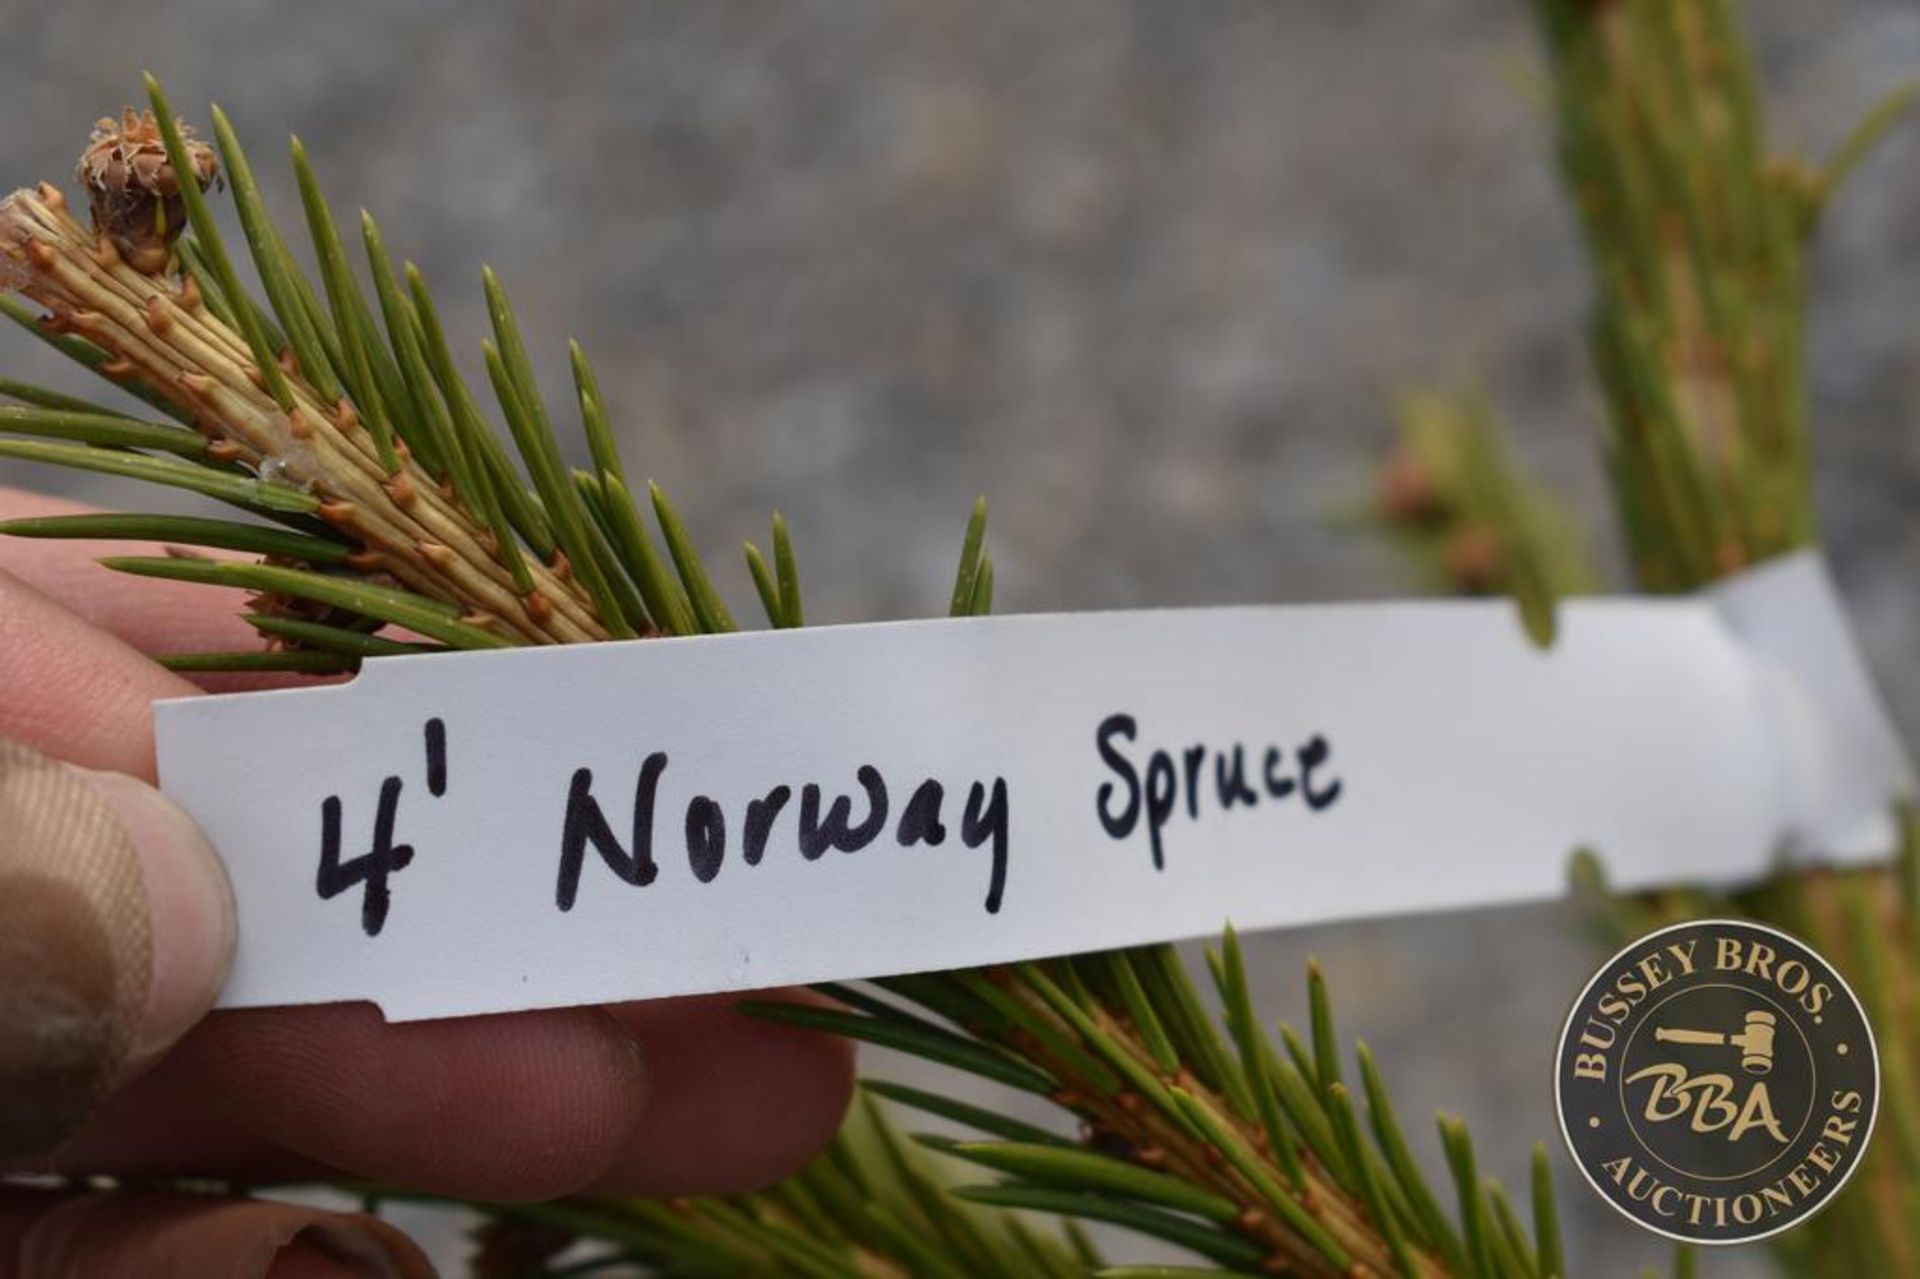 NORWAY SPRUCE 1105 - Image 3 of 3